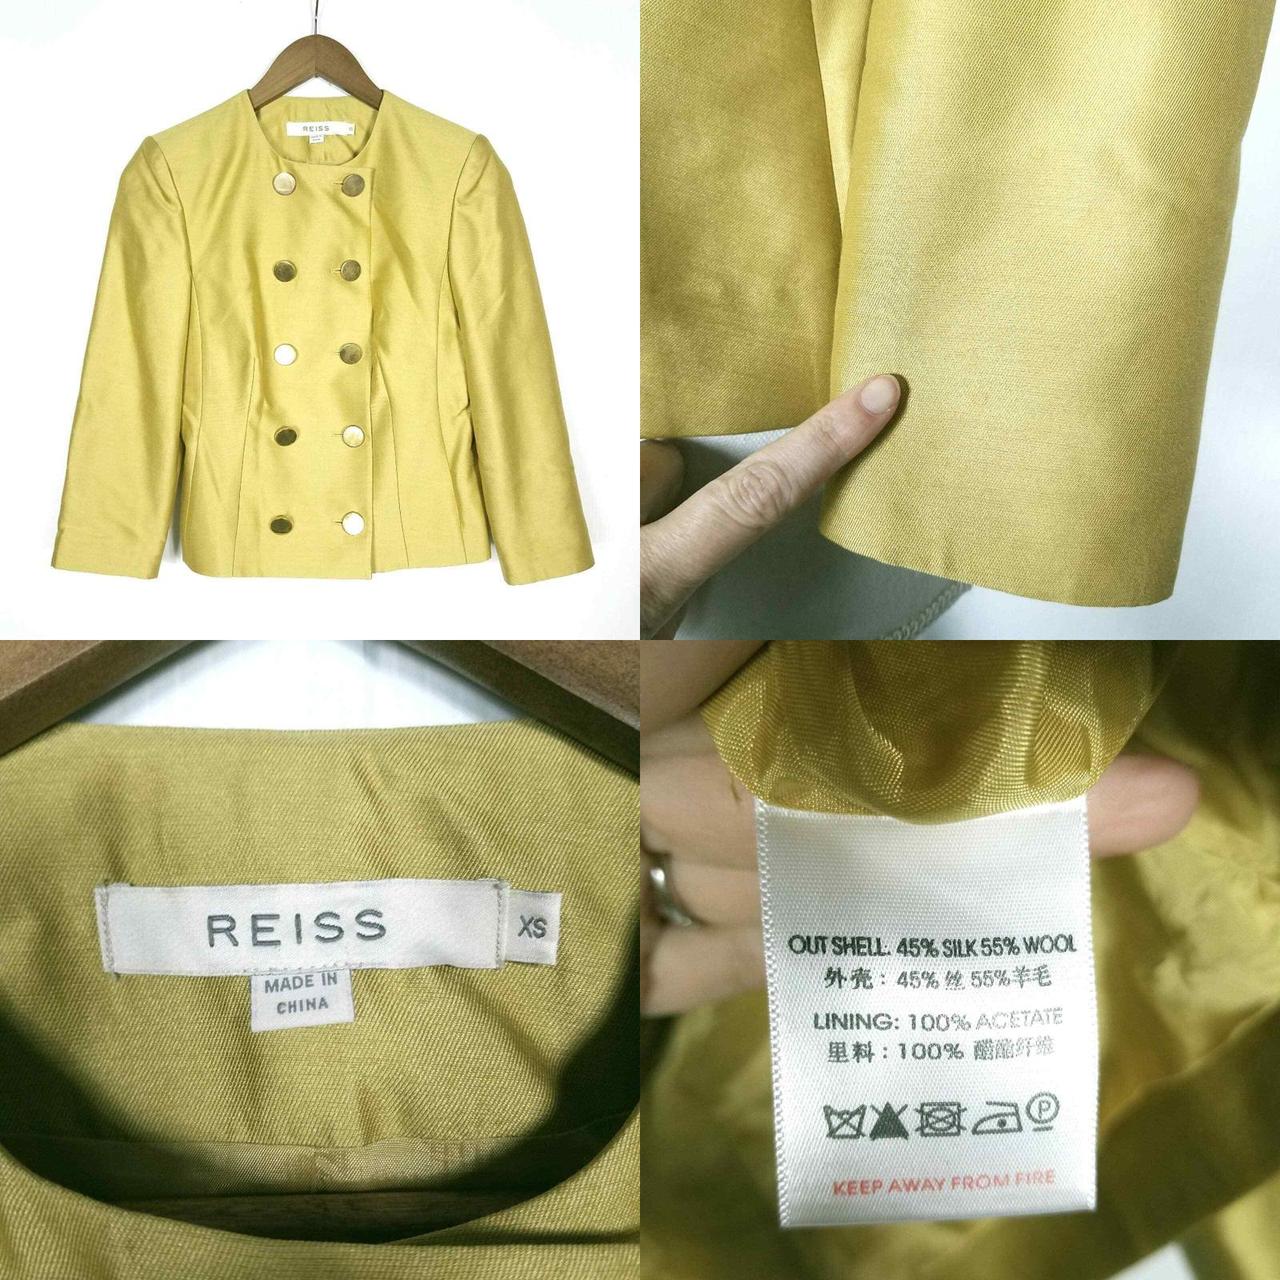 Reiss Women's Gold and Yellow (4)